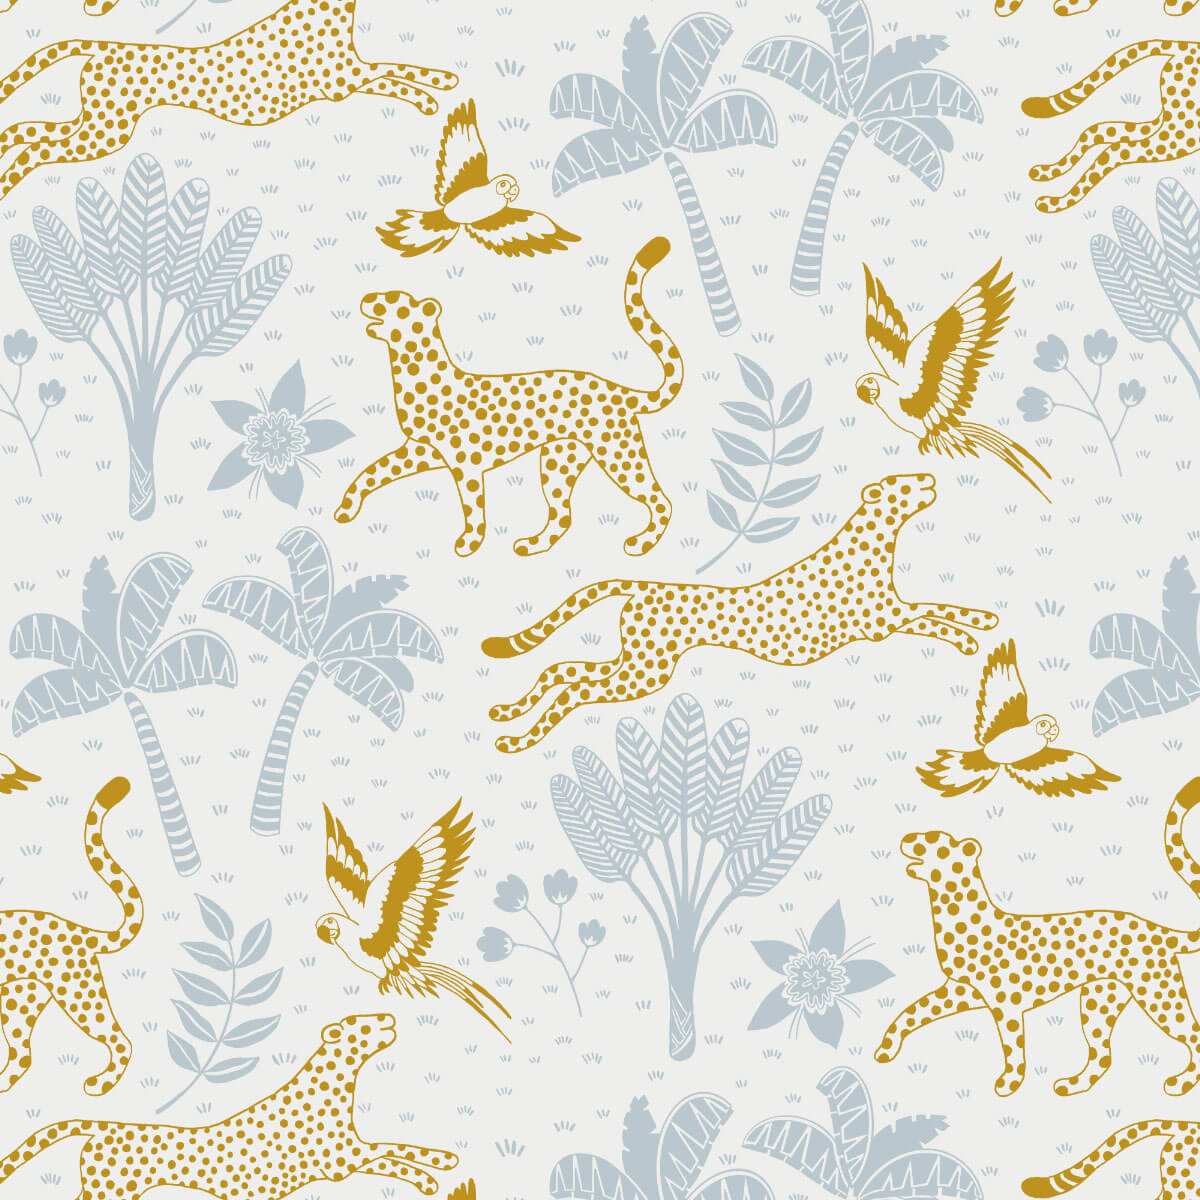 pattern with cheetahs, palms and parrots